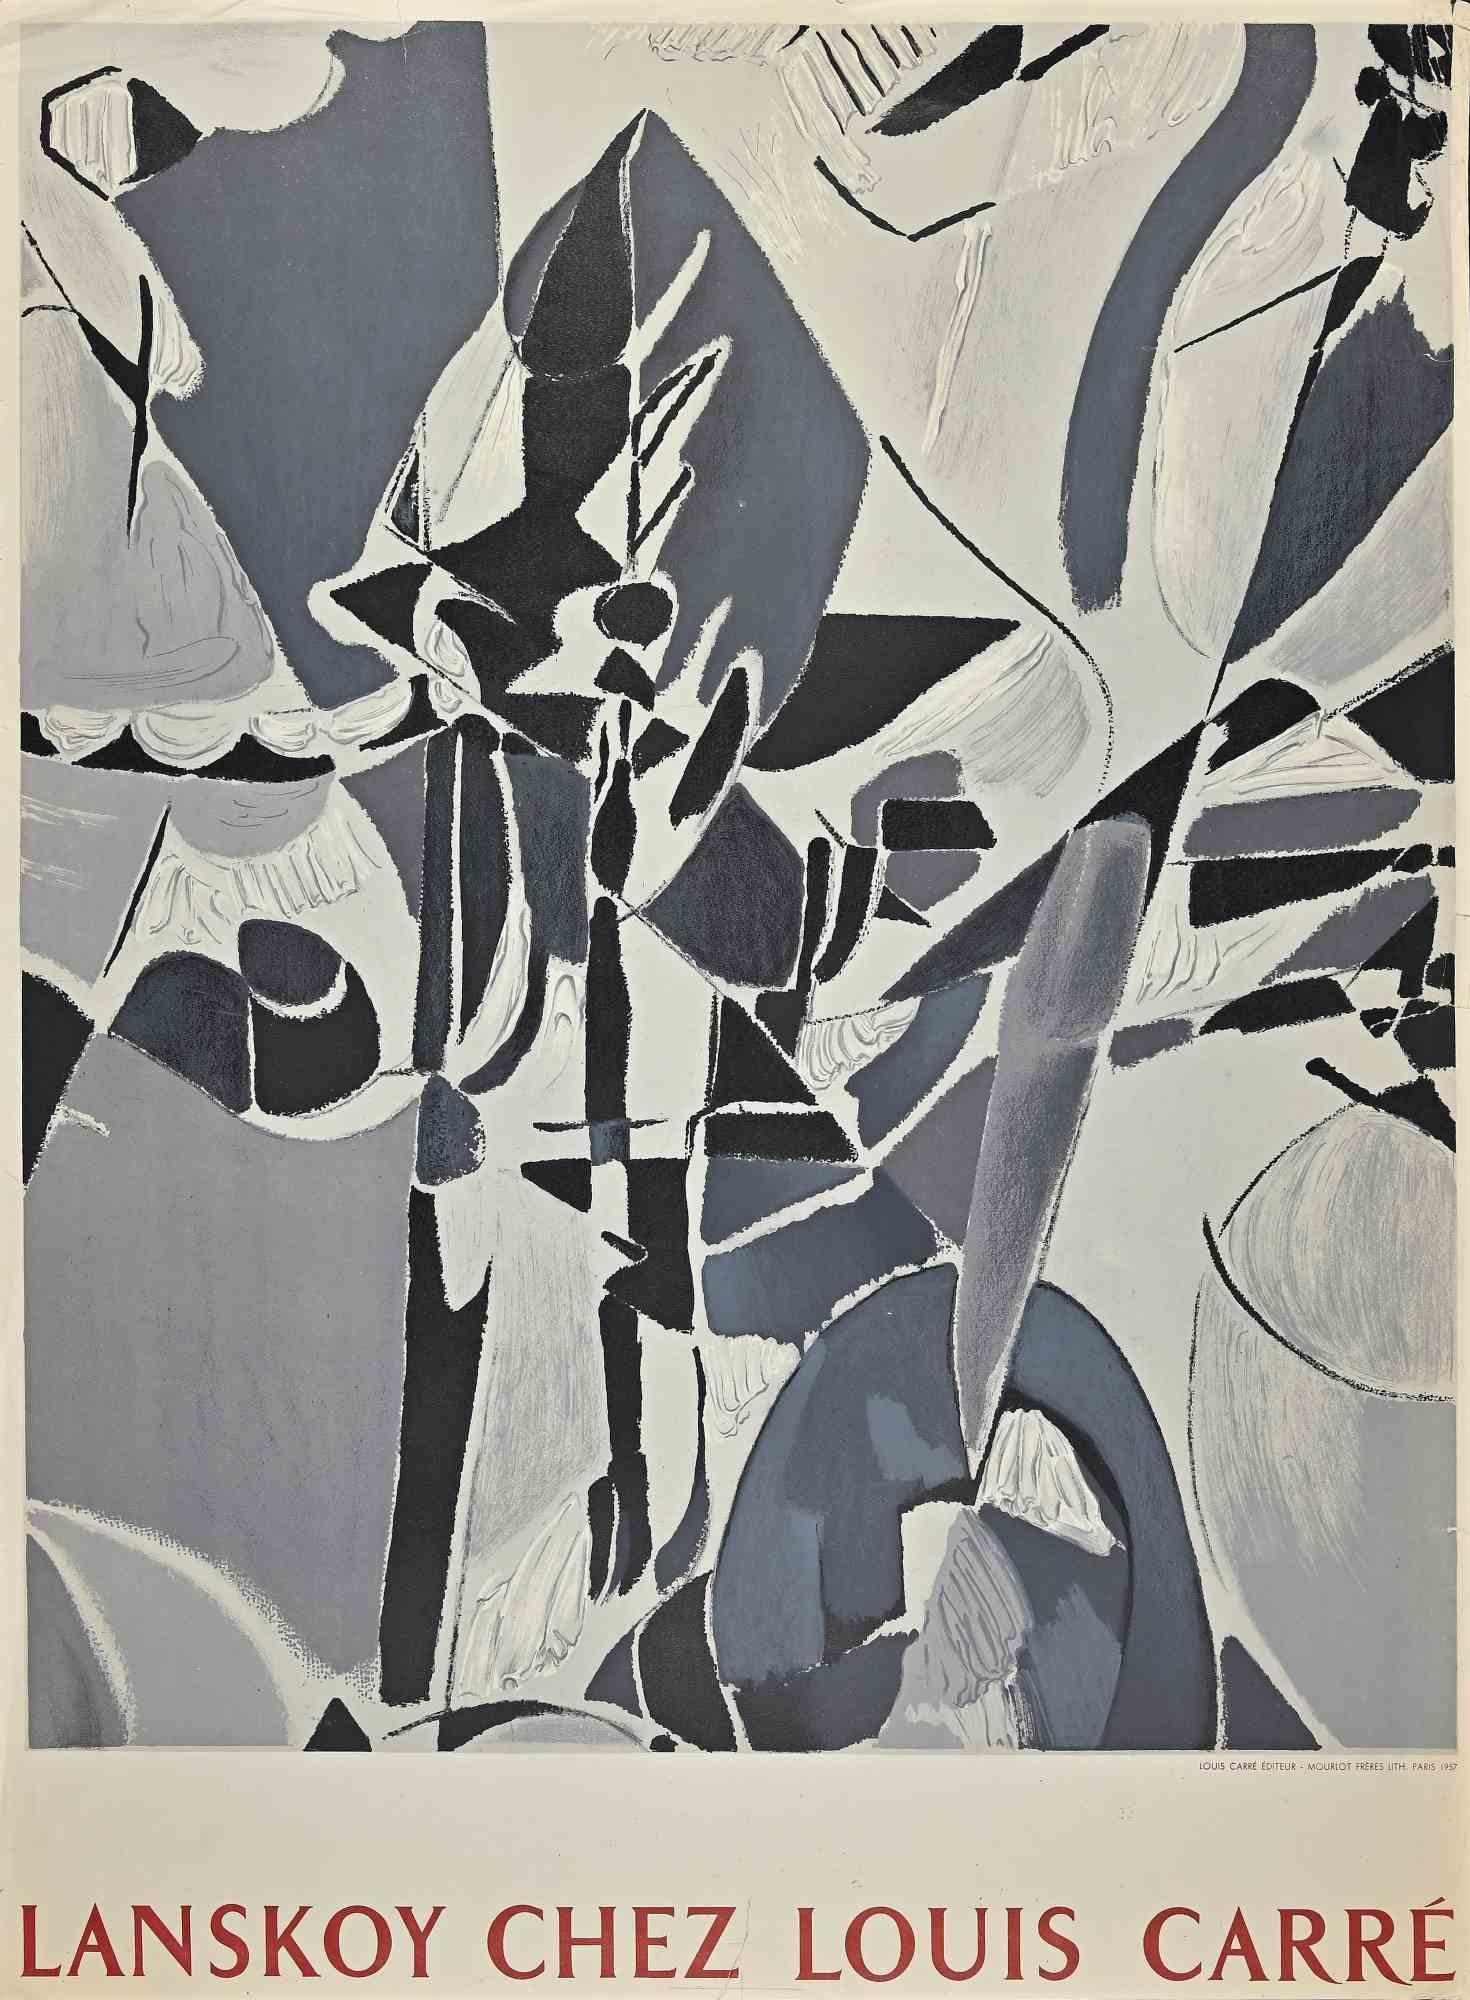 André Lanskoy Abstract Print - Vintage Poster Galerie Louis Carré - Lithograph and offset by A. Lanskoy - 1957